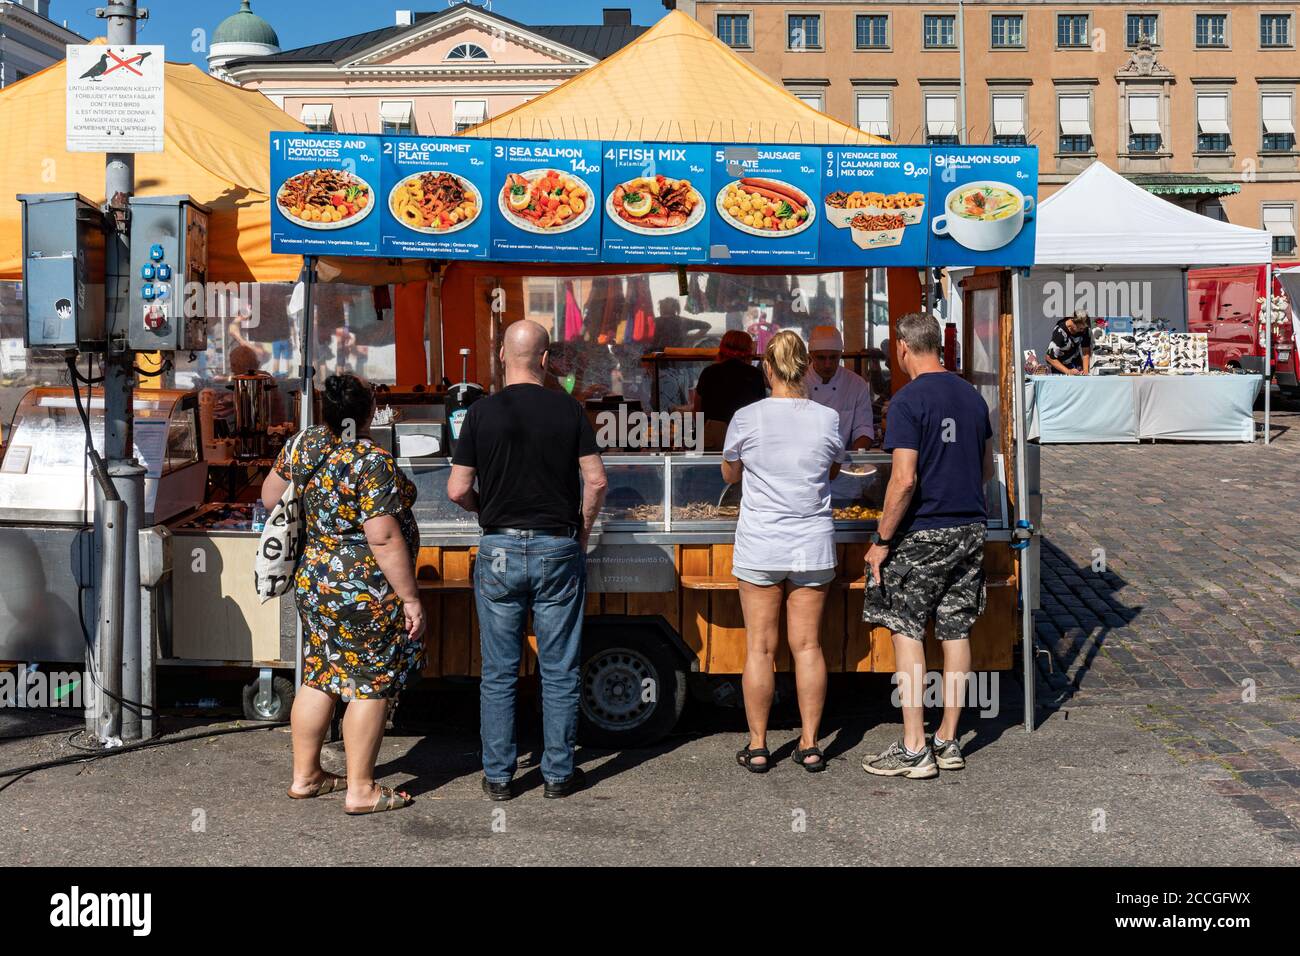 People queuing at fish dish vendor's stall in Market Square, Helsinki, Finland Stock Photo